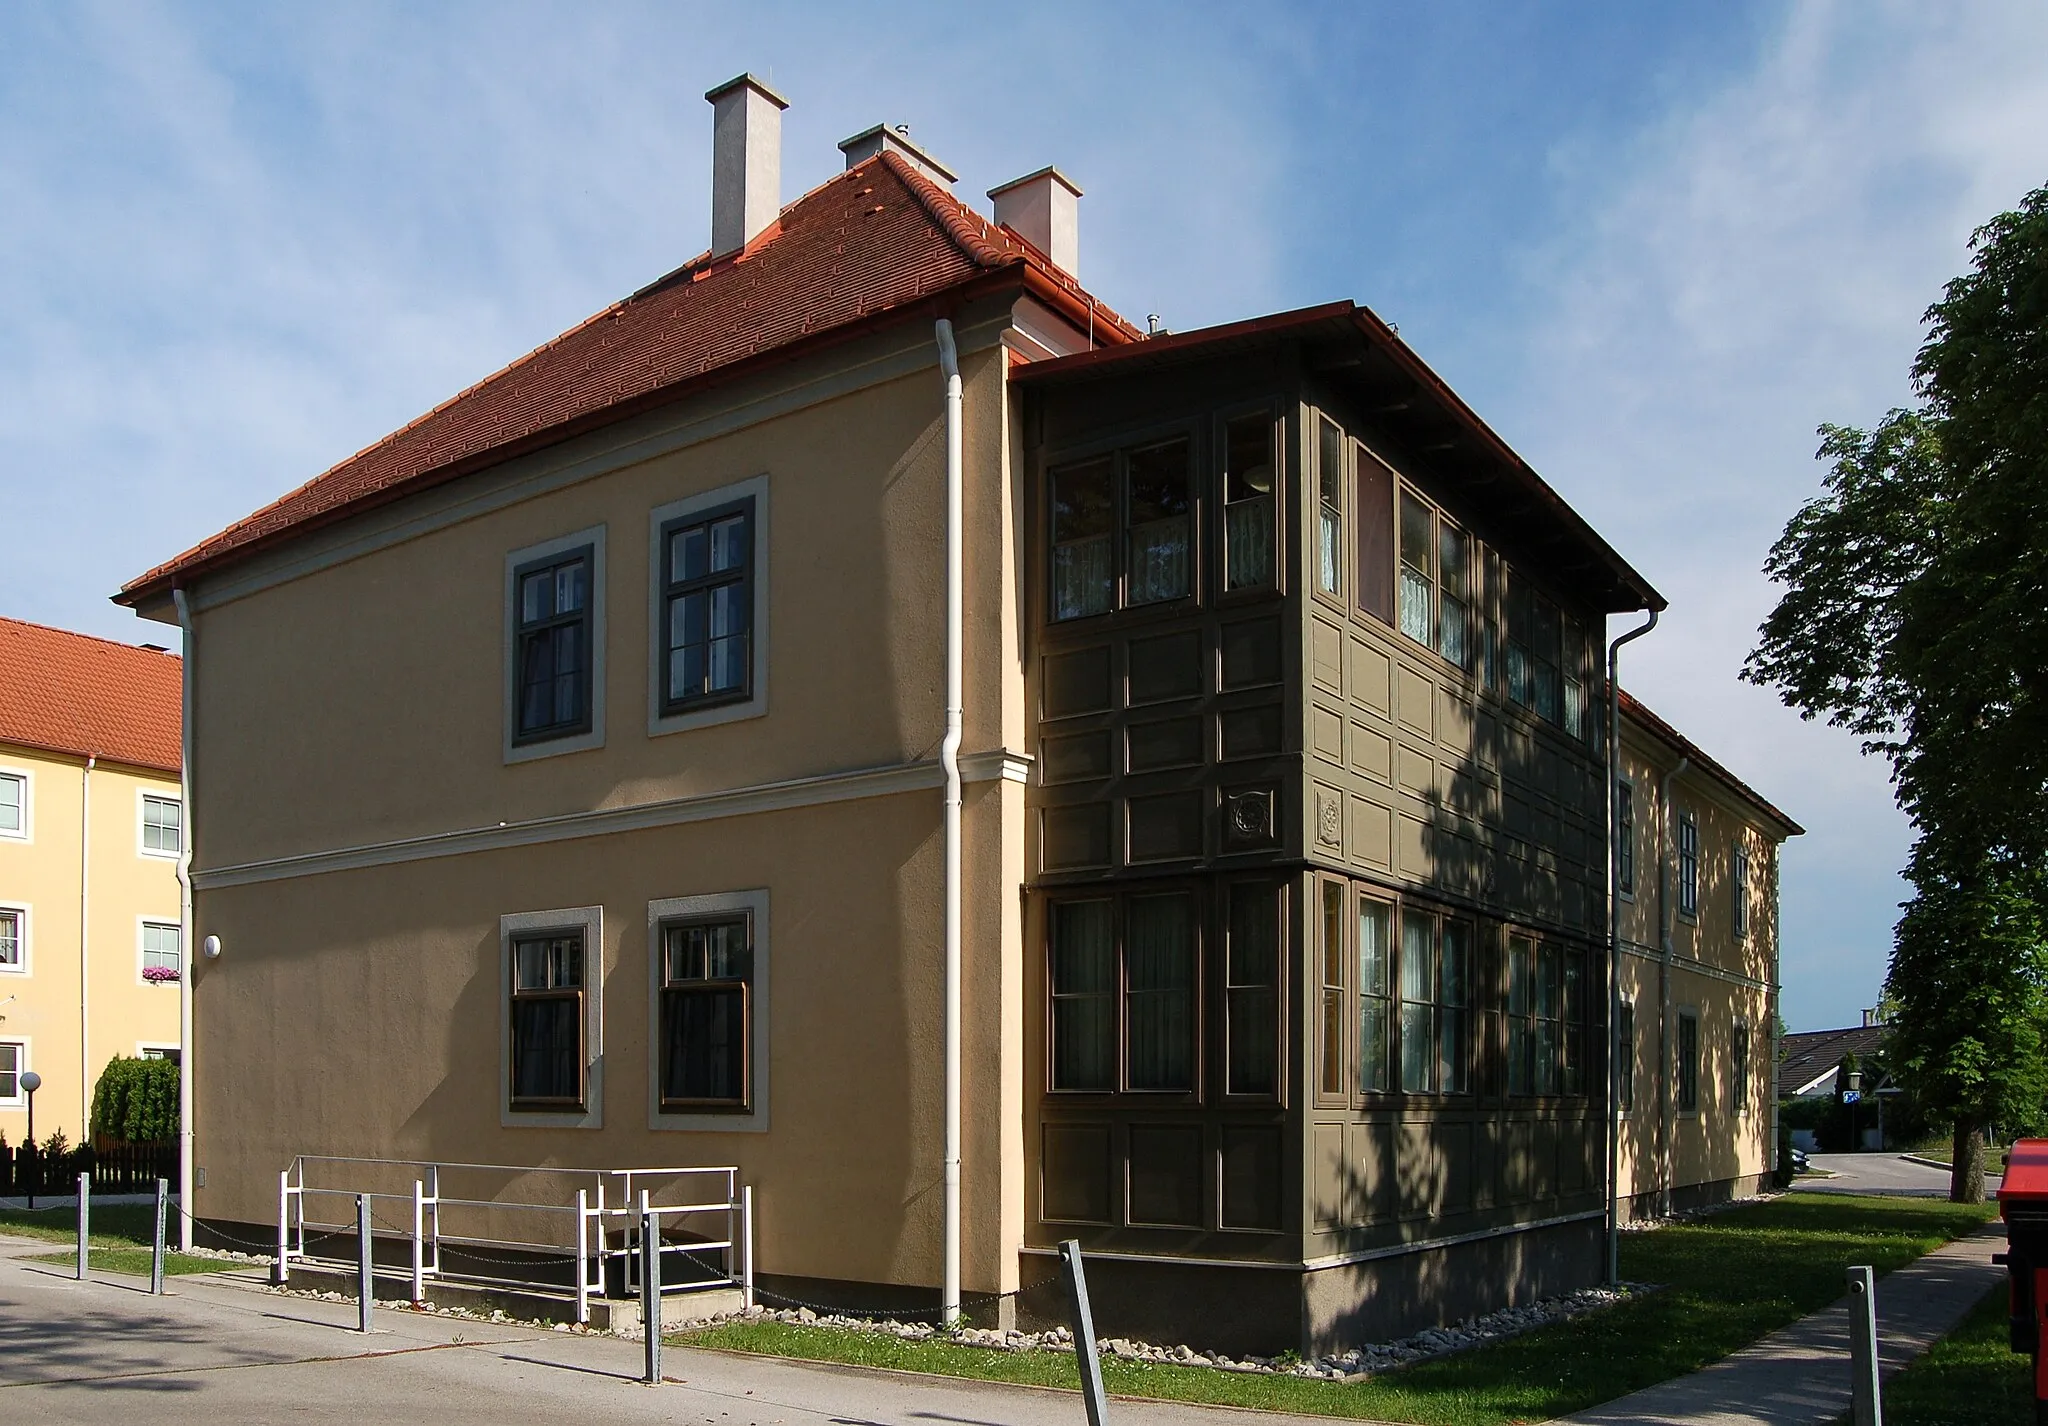 Photo showing: The former post station at Wr. Neustädterstraße 1 in Günselsdorf, Lower Austria now is a residential building and protected as a cultural heritage monument.